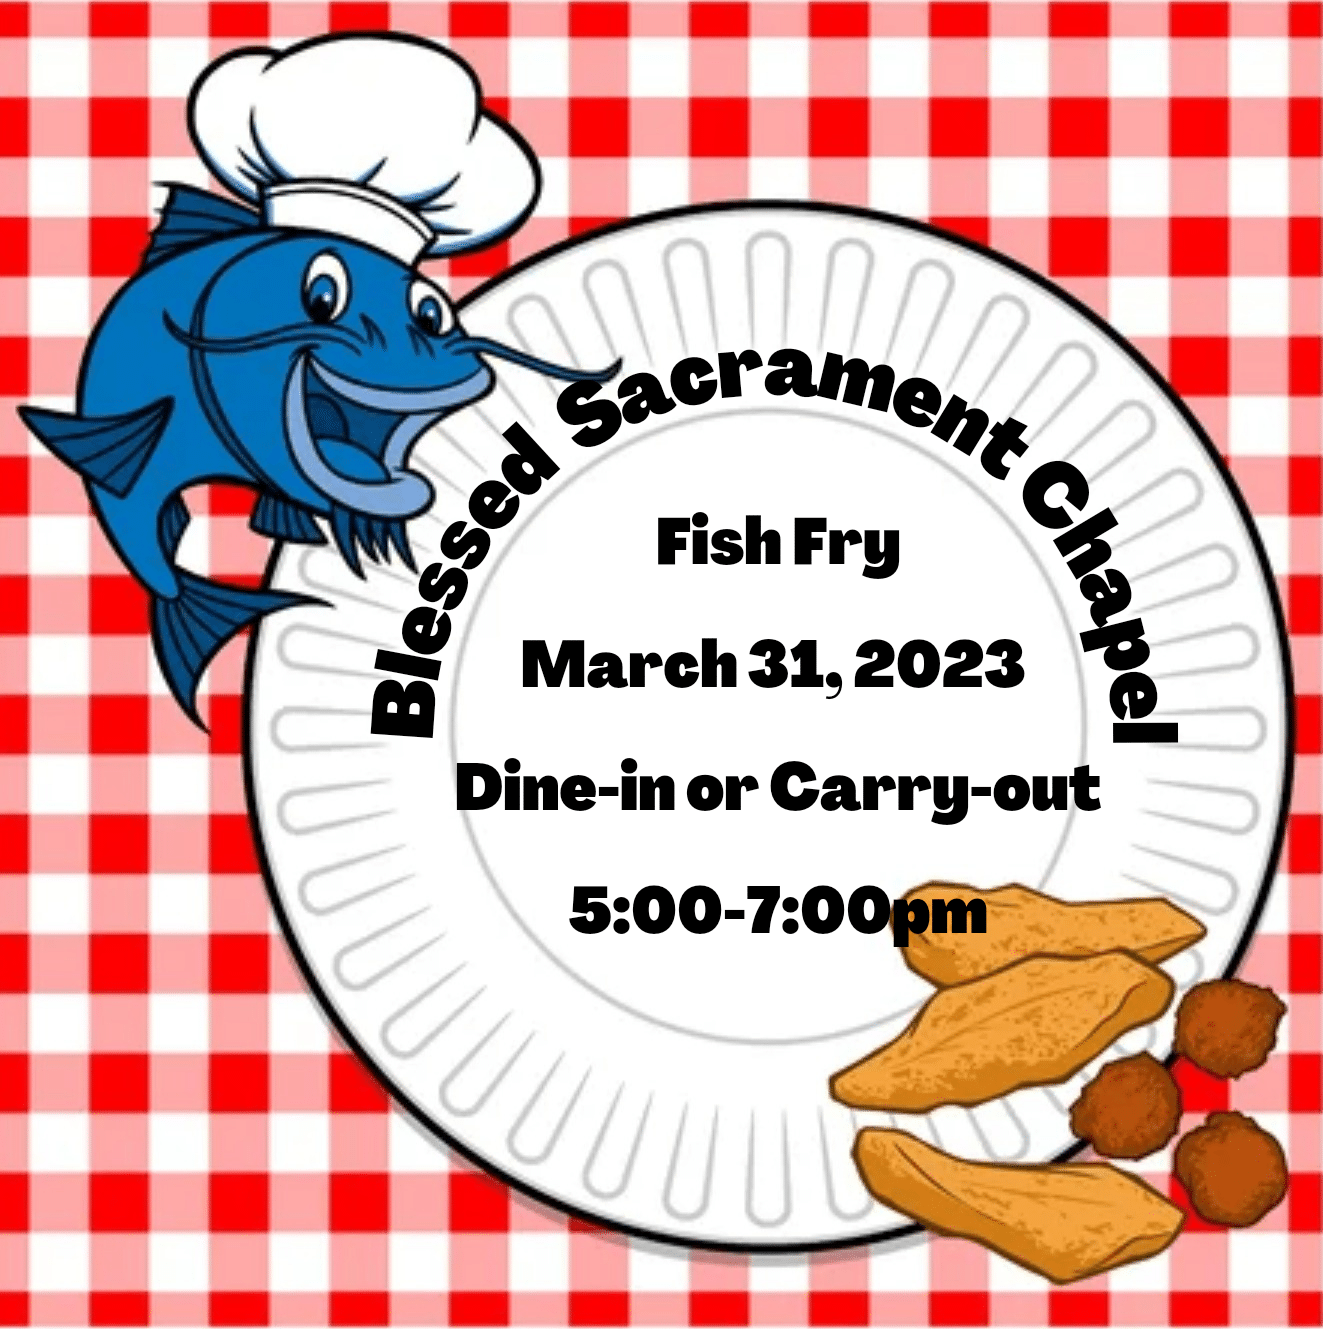 Fish Fry - March 31, 2023